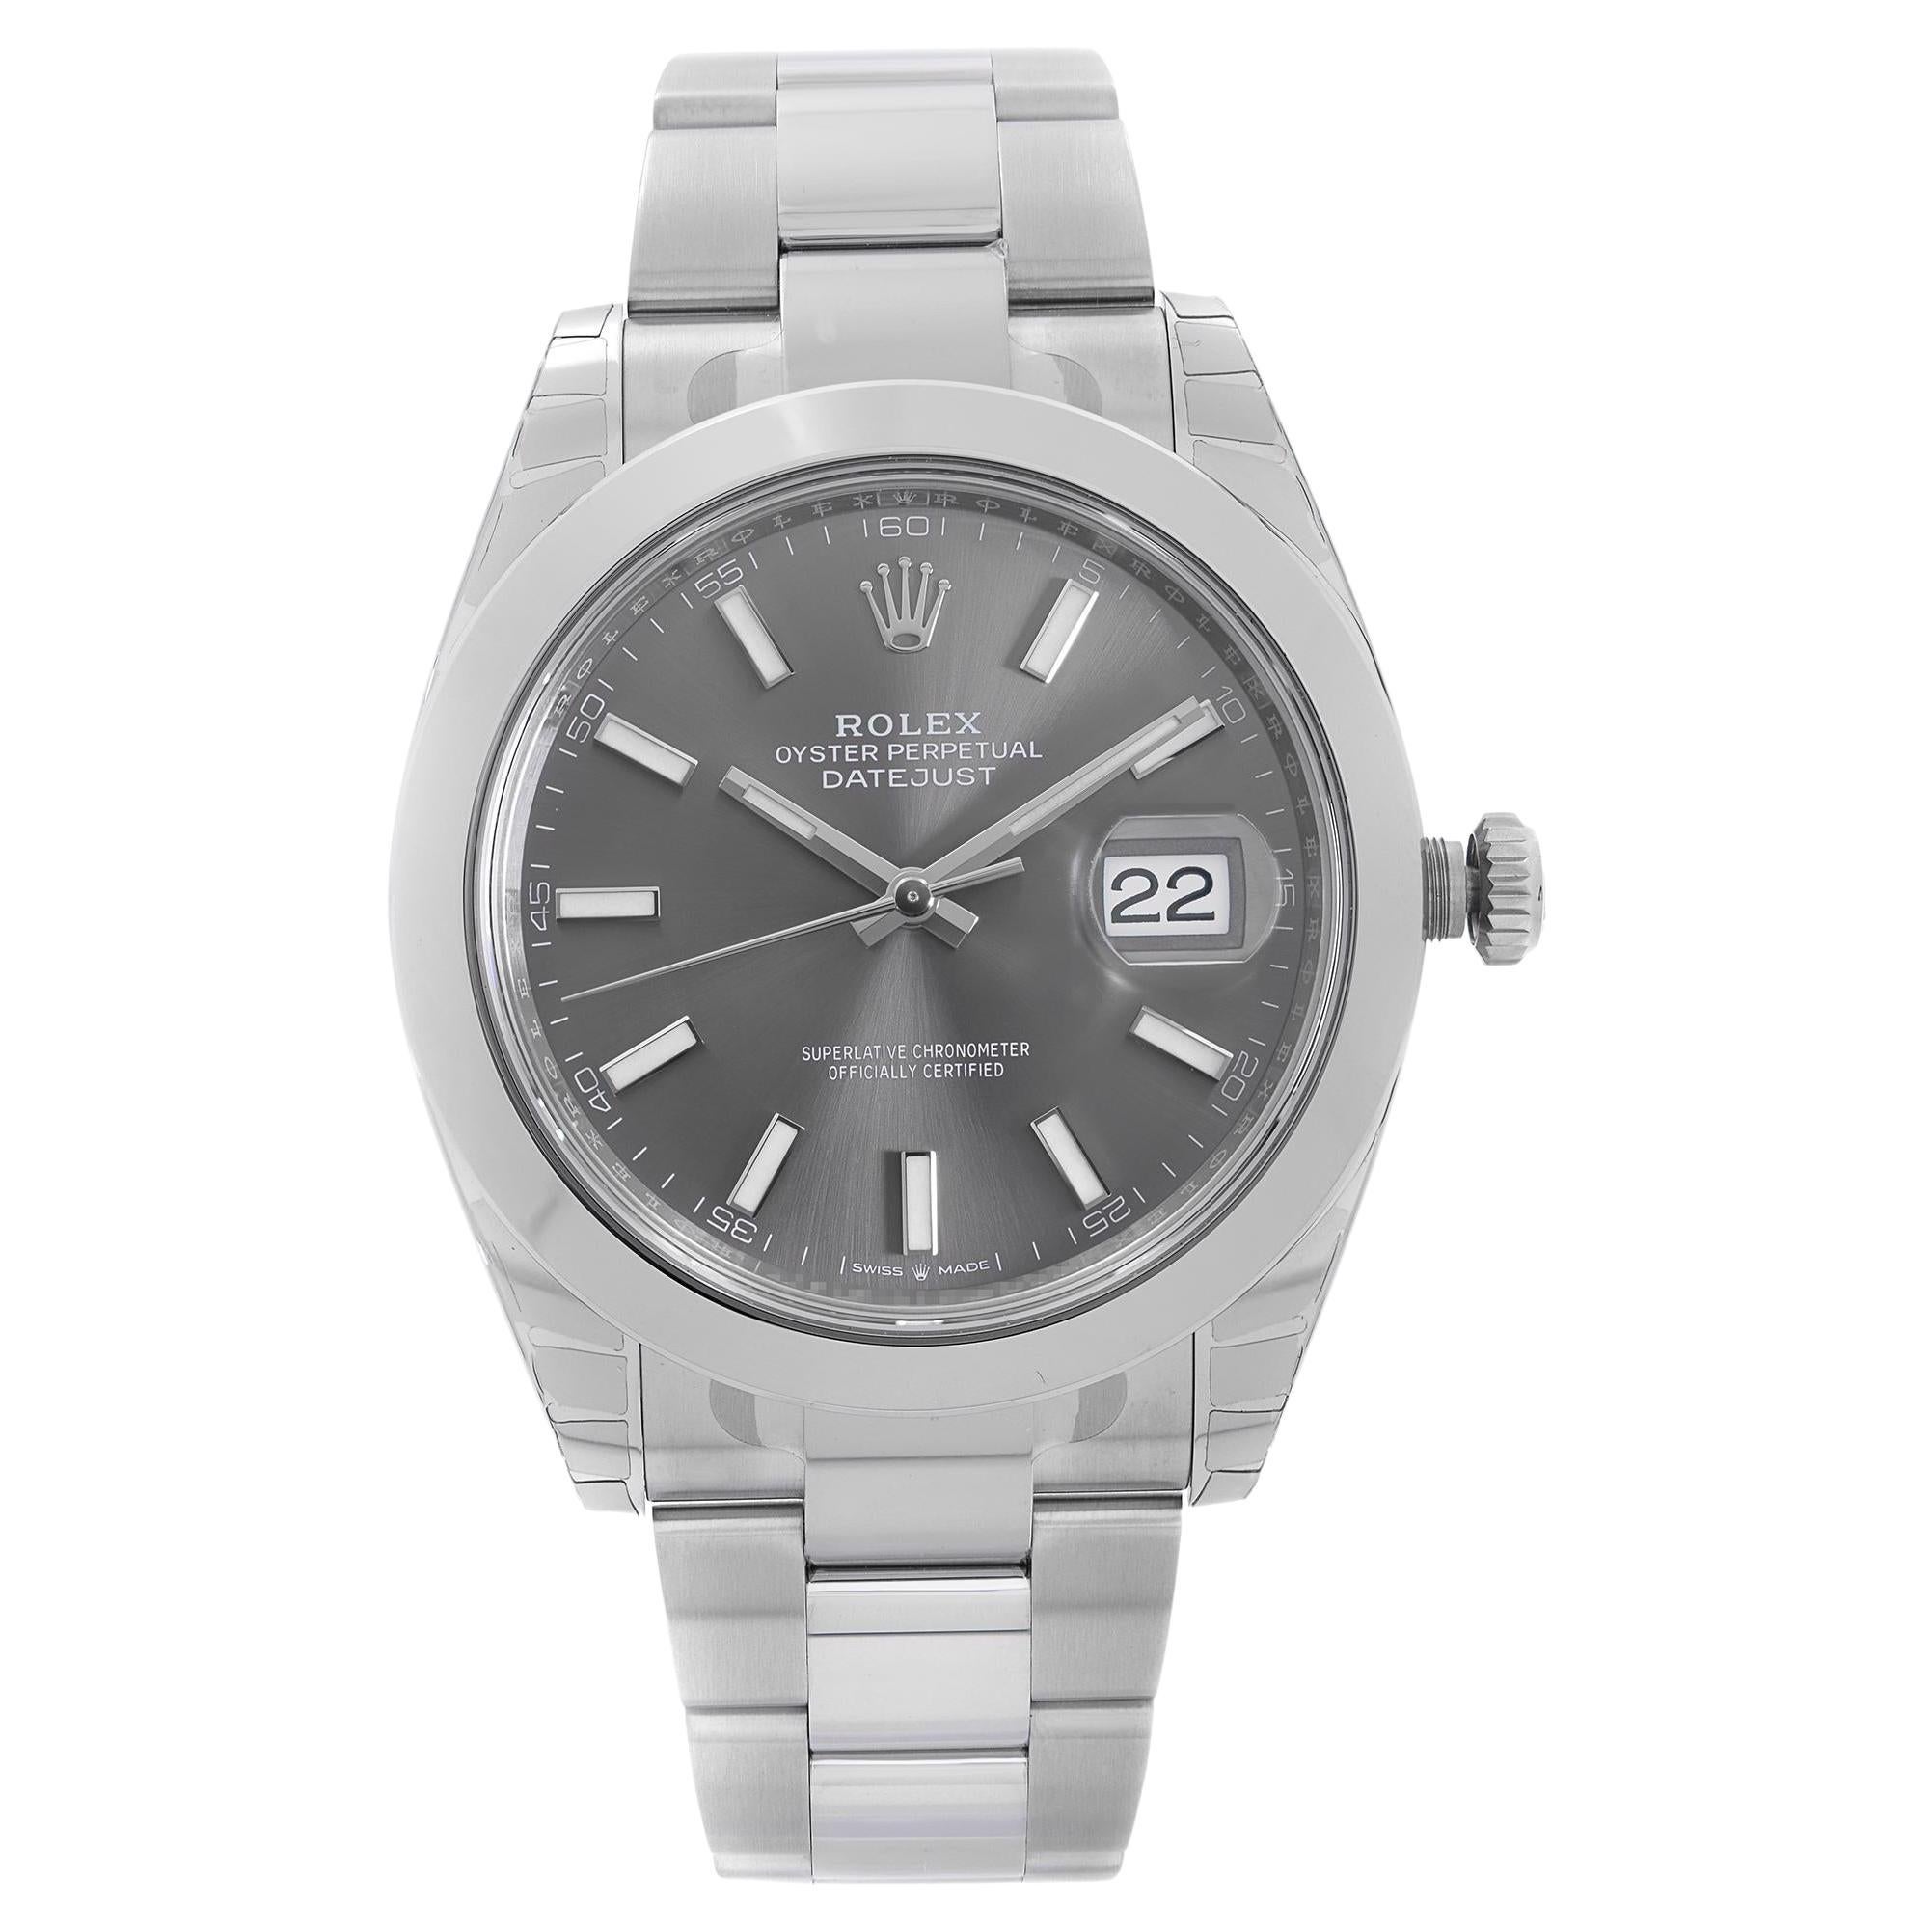 Rolex Datejust 41 Oyster Stainless Steel Rhodium Dial Automatic Men Watch 126300